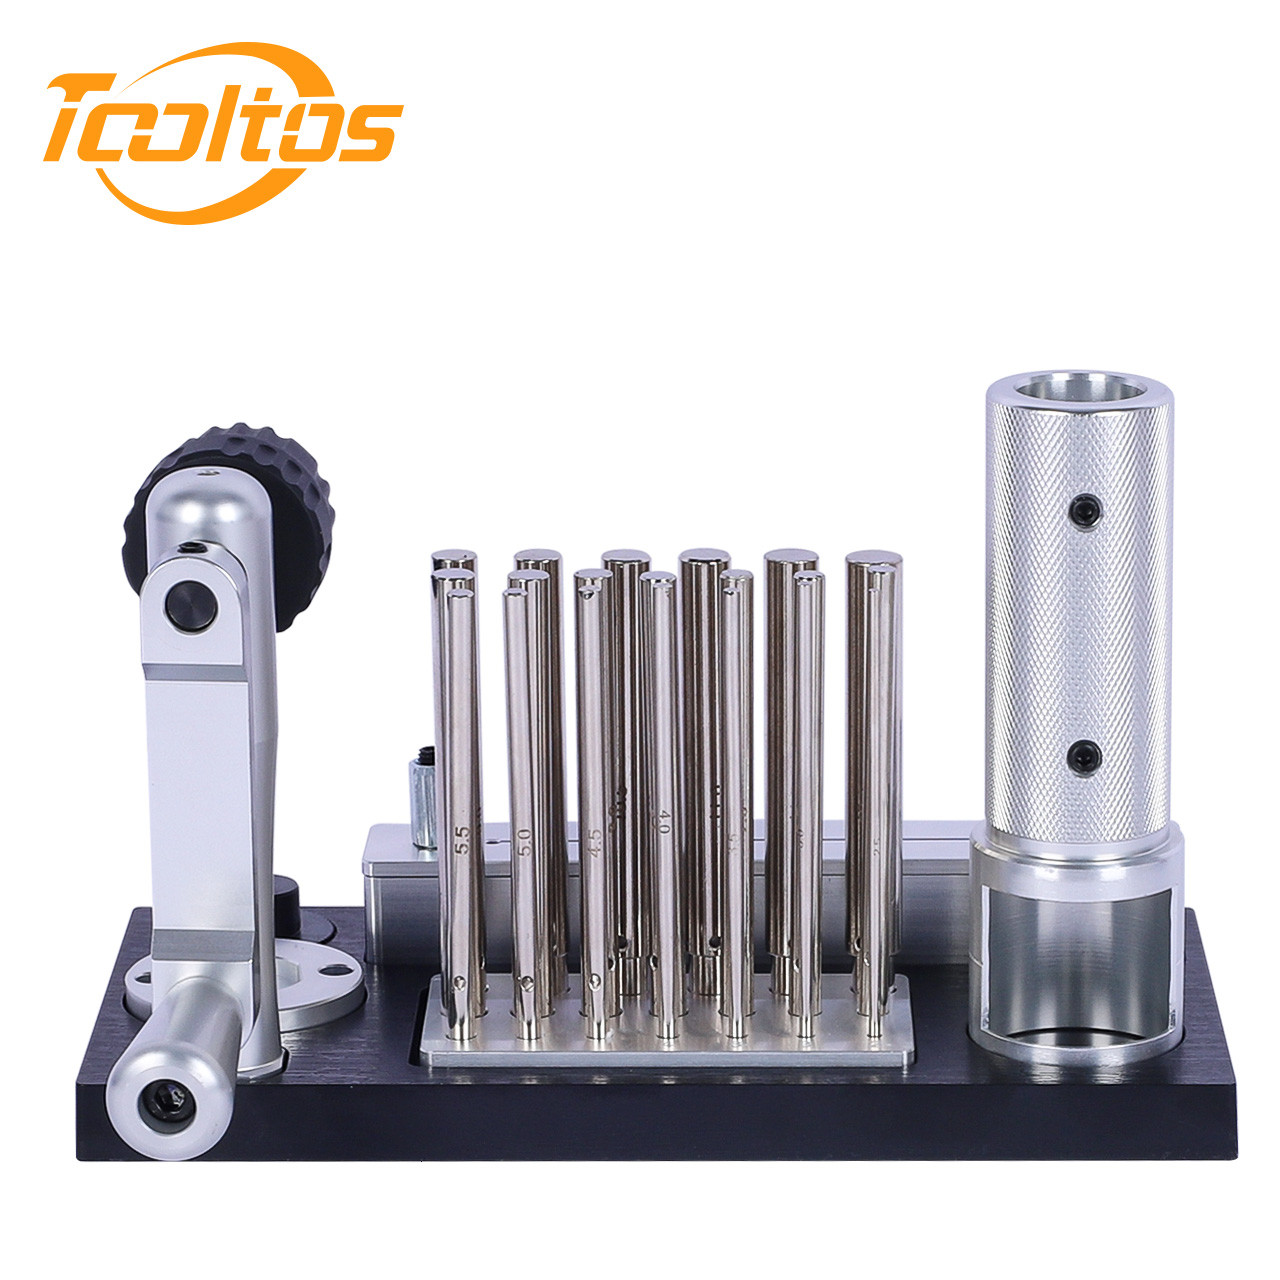 Quality Tooltos Stainless Steel Manual Jewelry Wire Drawing And Winding Machine Tools for sale